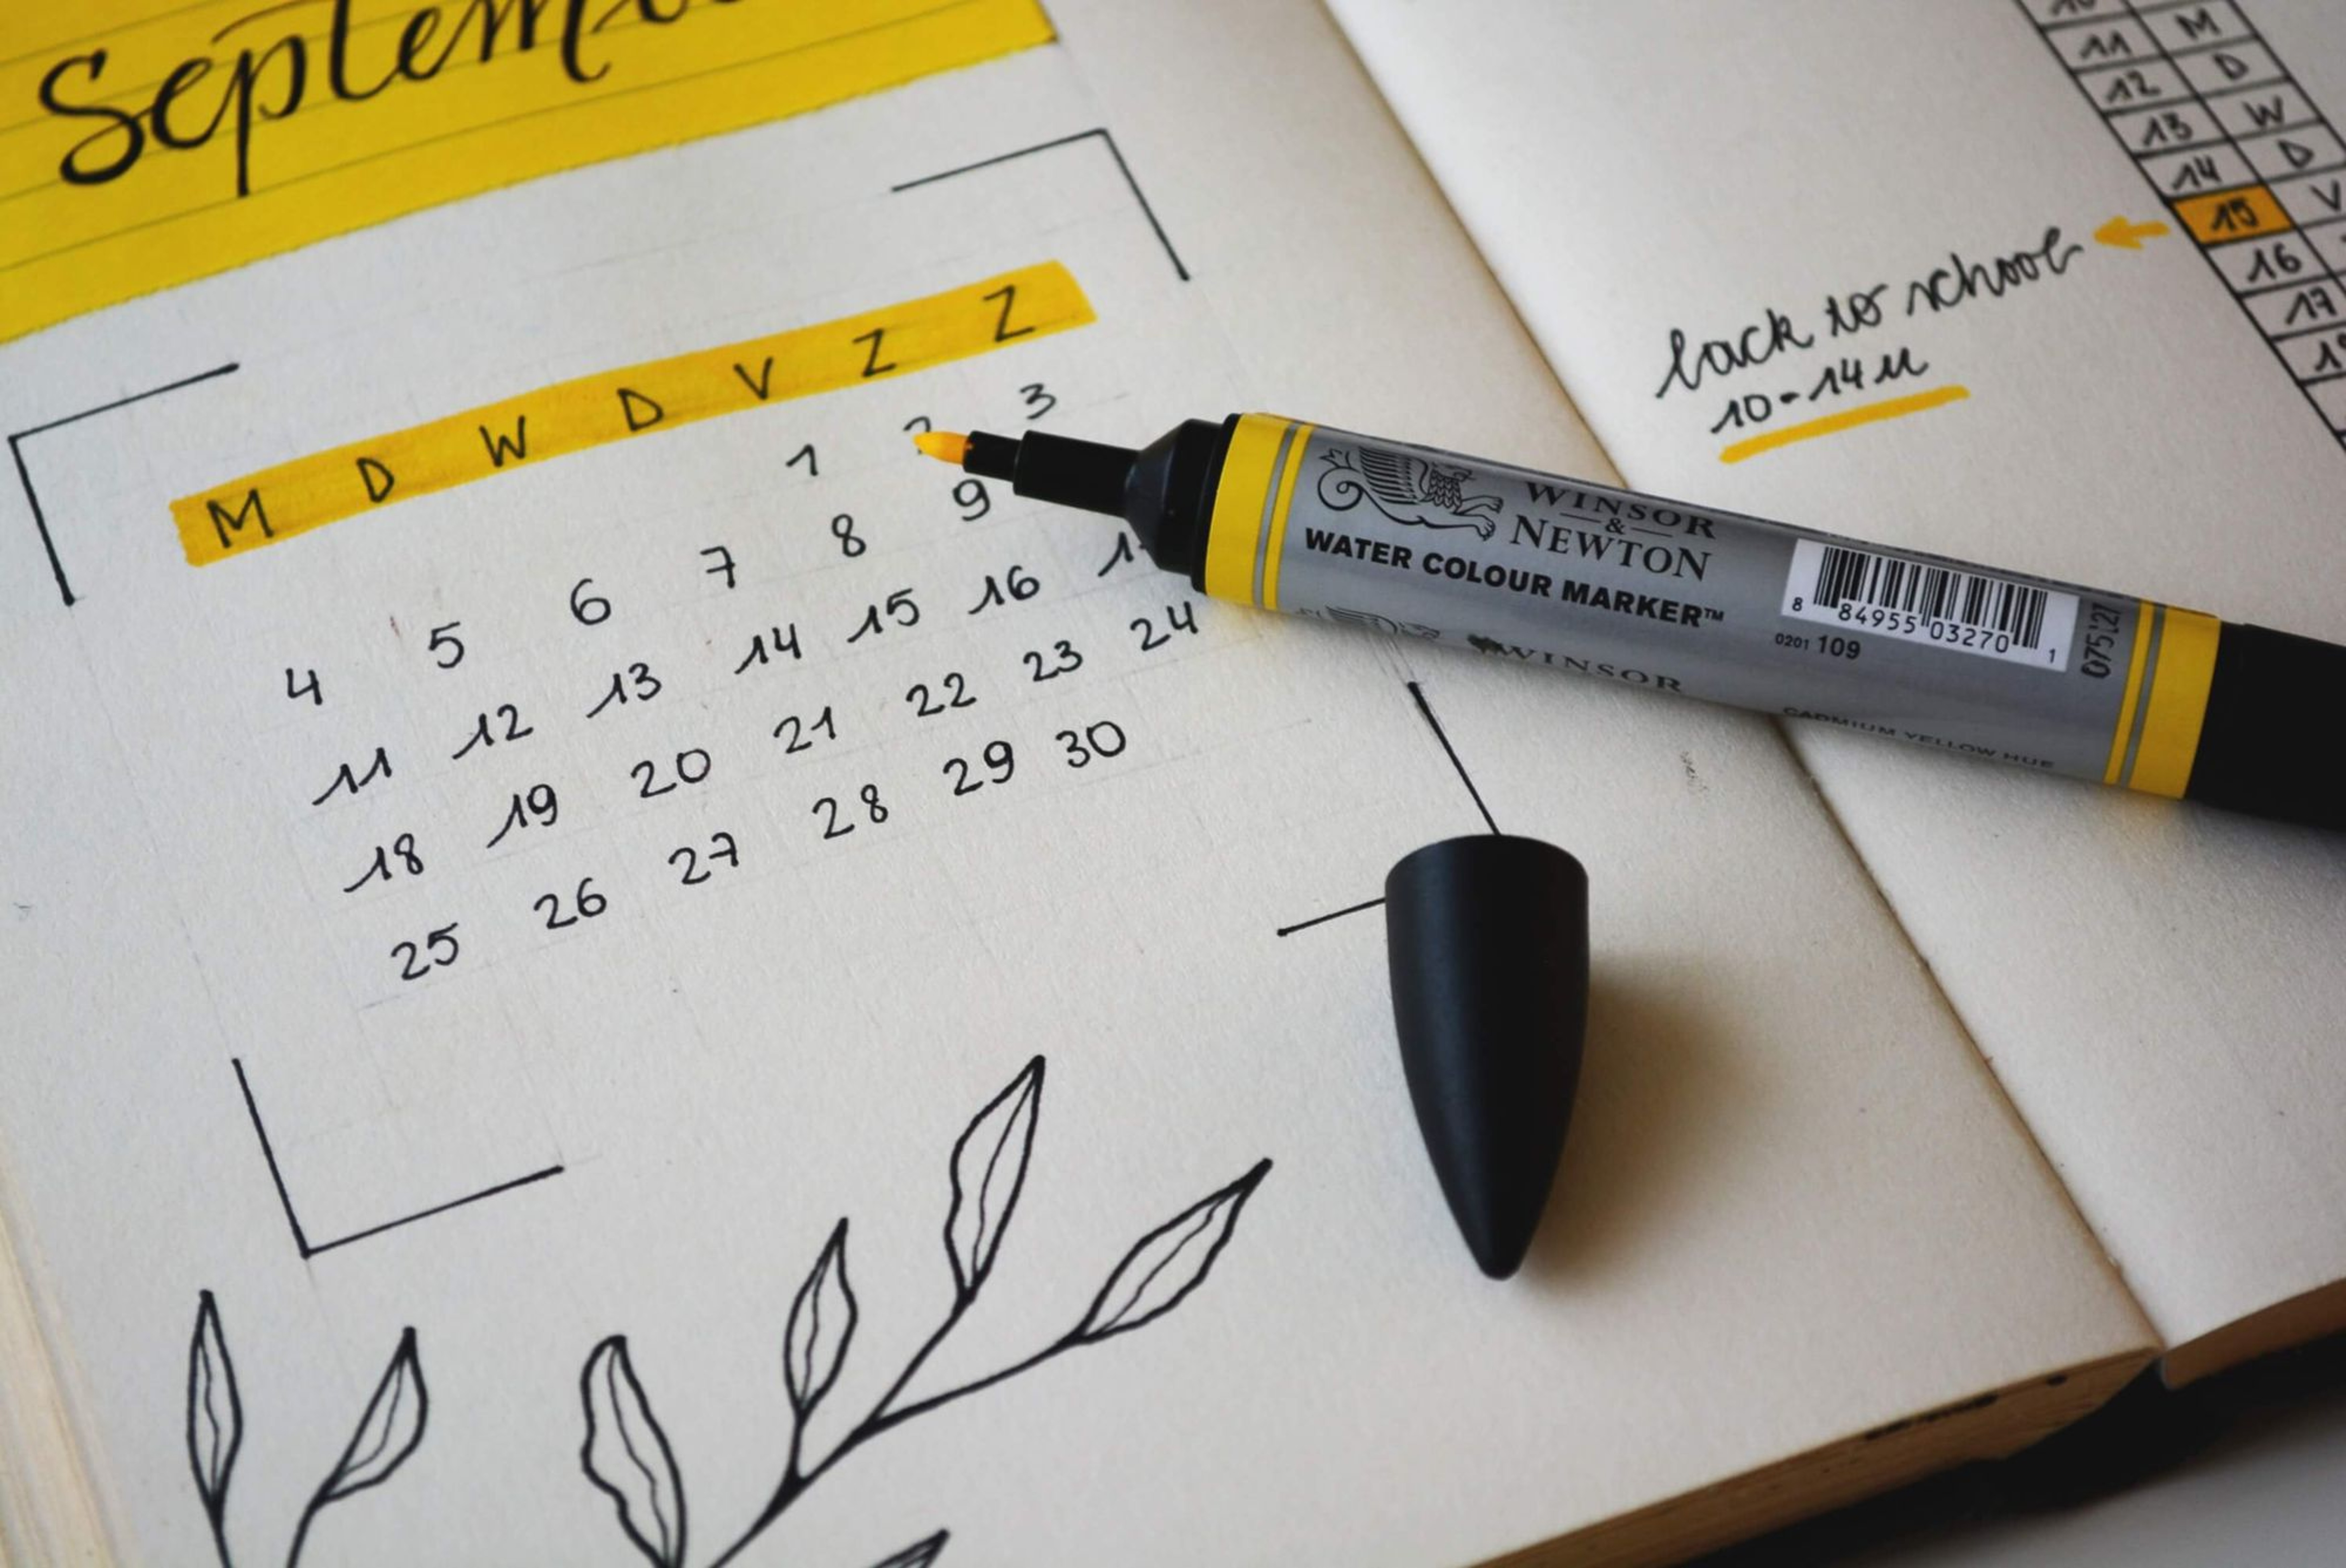 How to Create Your Own Social Media Calendar in 7 Simple Steps